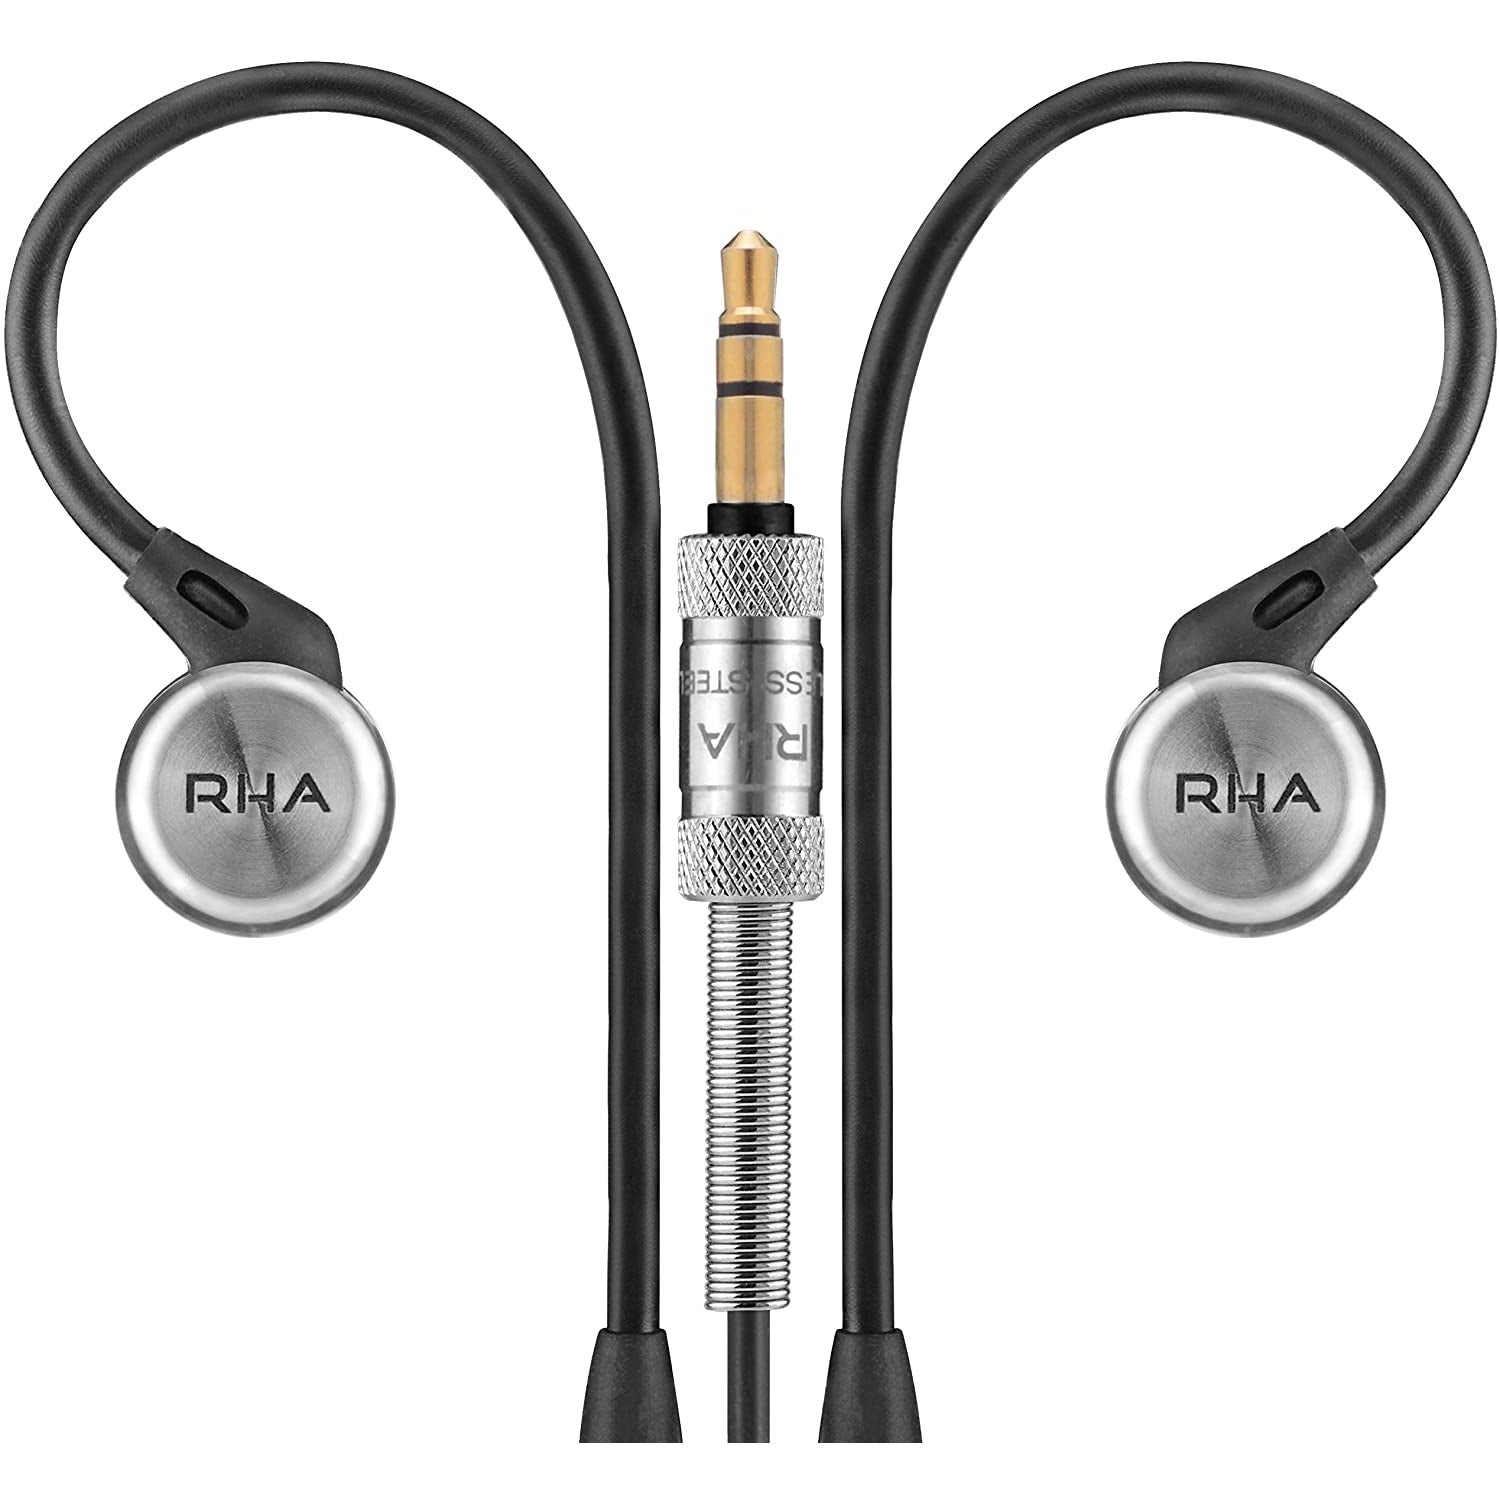 RHA MA750i In-Ear Headphones with High Resolution Audio & Mic/Remote for iOS, Black